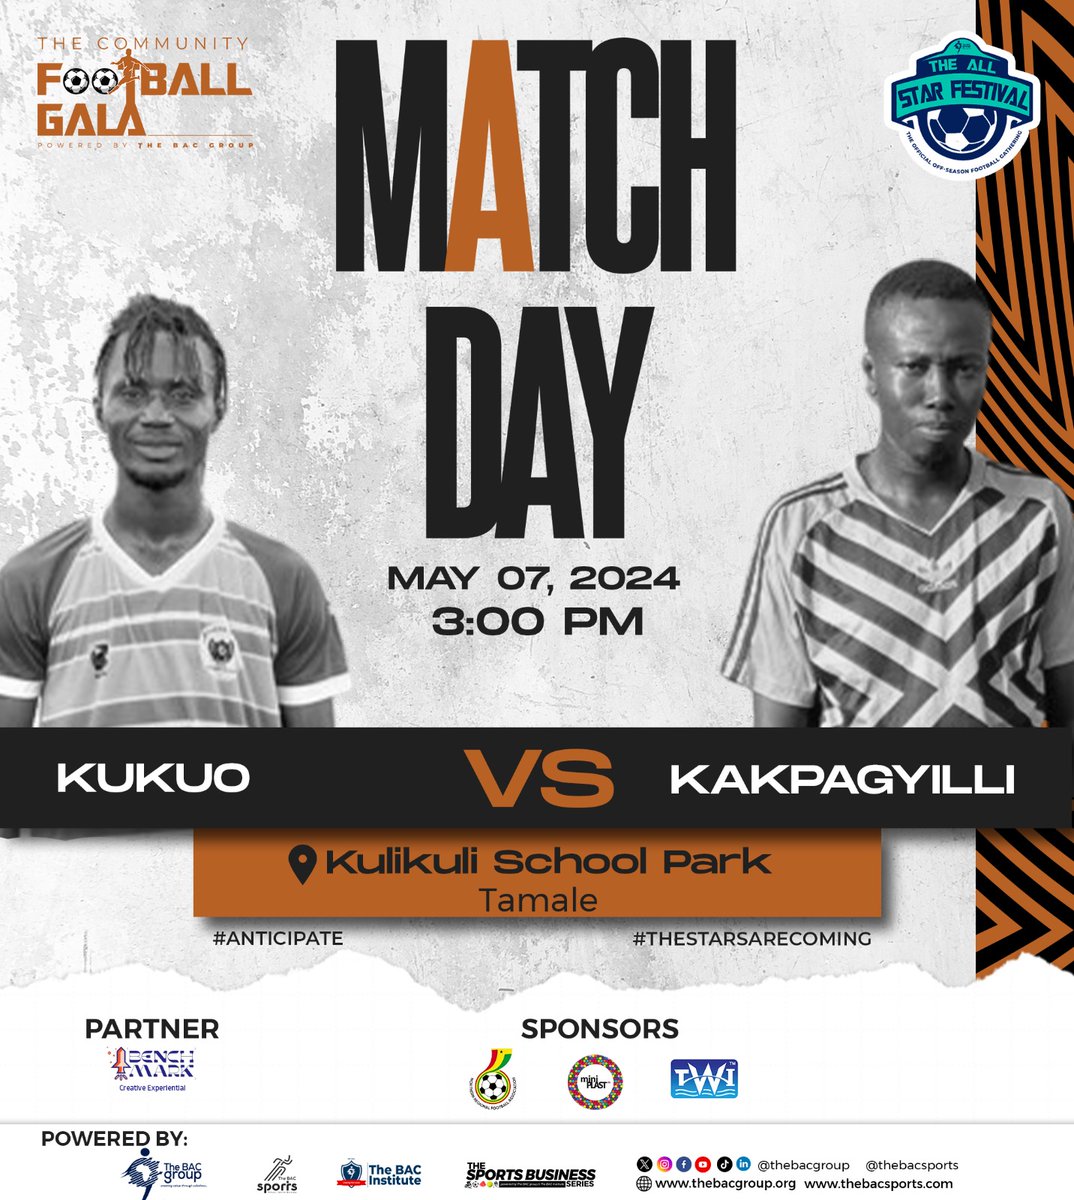 Match day in Tamale!

Kukuo takes on Kakpagyilli in a game that concludes the first round of the #AllStarFestival Community Football Gala.

#TheBACSports